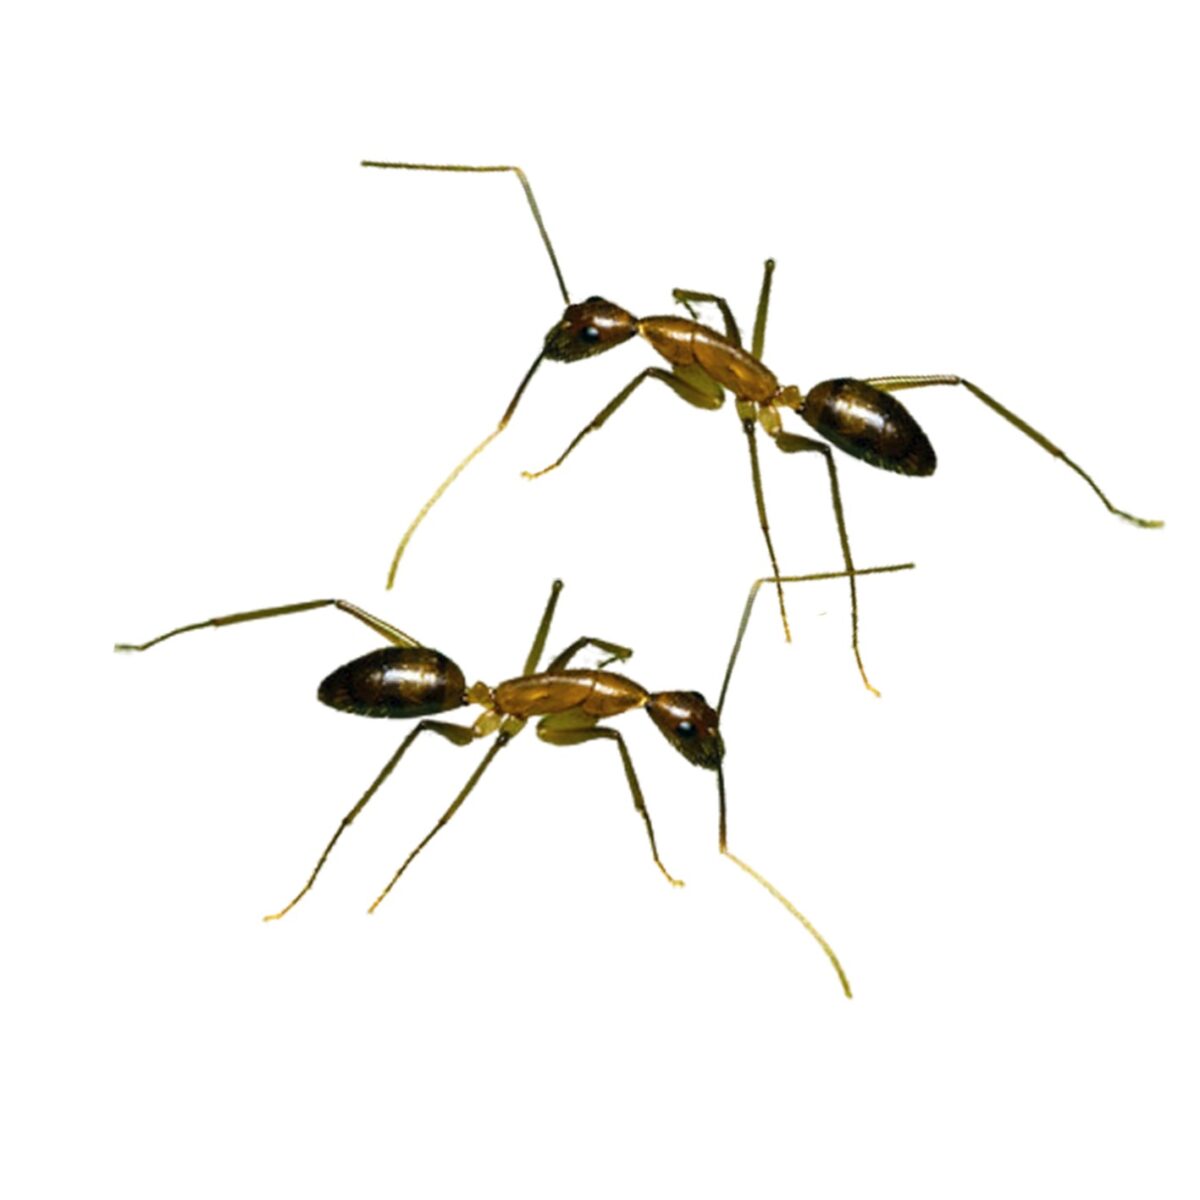 camponotus carin Queen ant